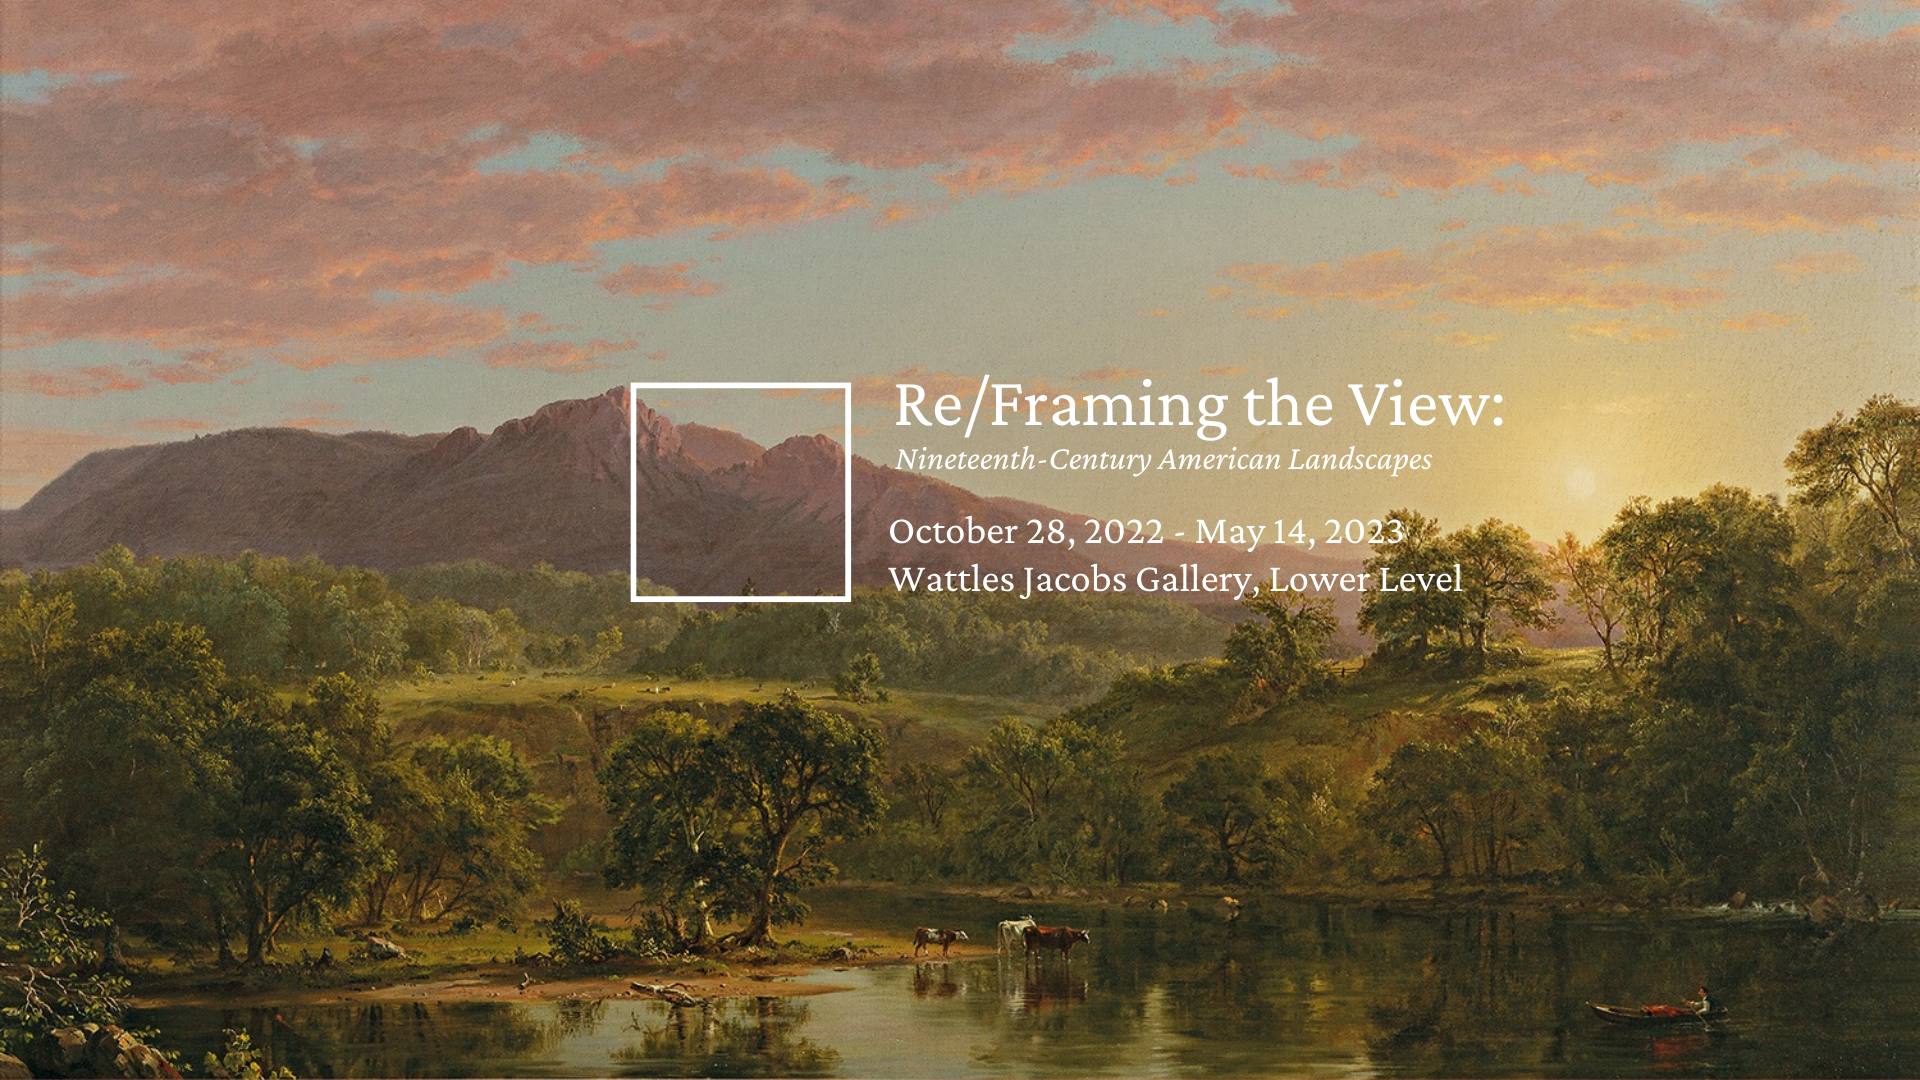 An ultrawide painting of a sunset nature scene on a river. There is text that reads: "Re/Framing the View: Nineteenth-Century American Landscapes. October 28, 2022 - May 14, 2023. Wattles Jacobs Gallery, Lower Level.